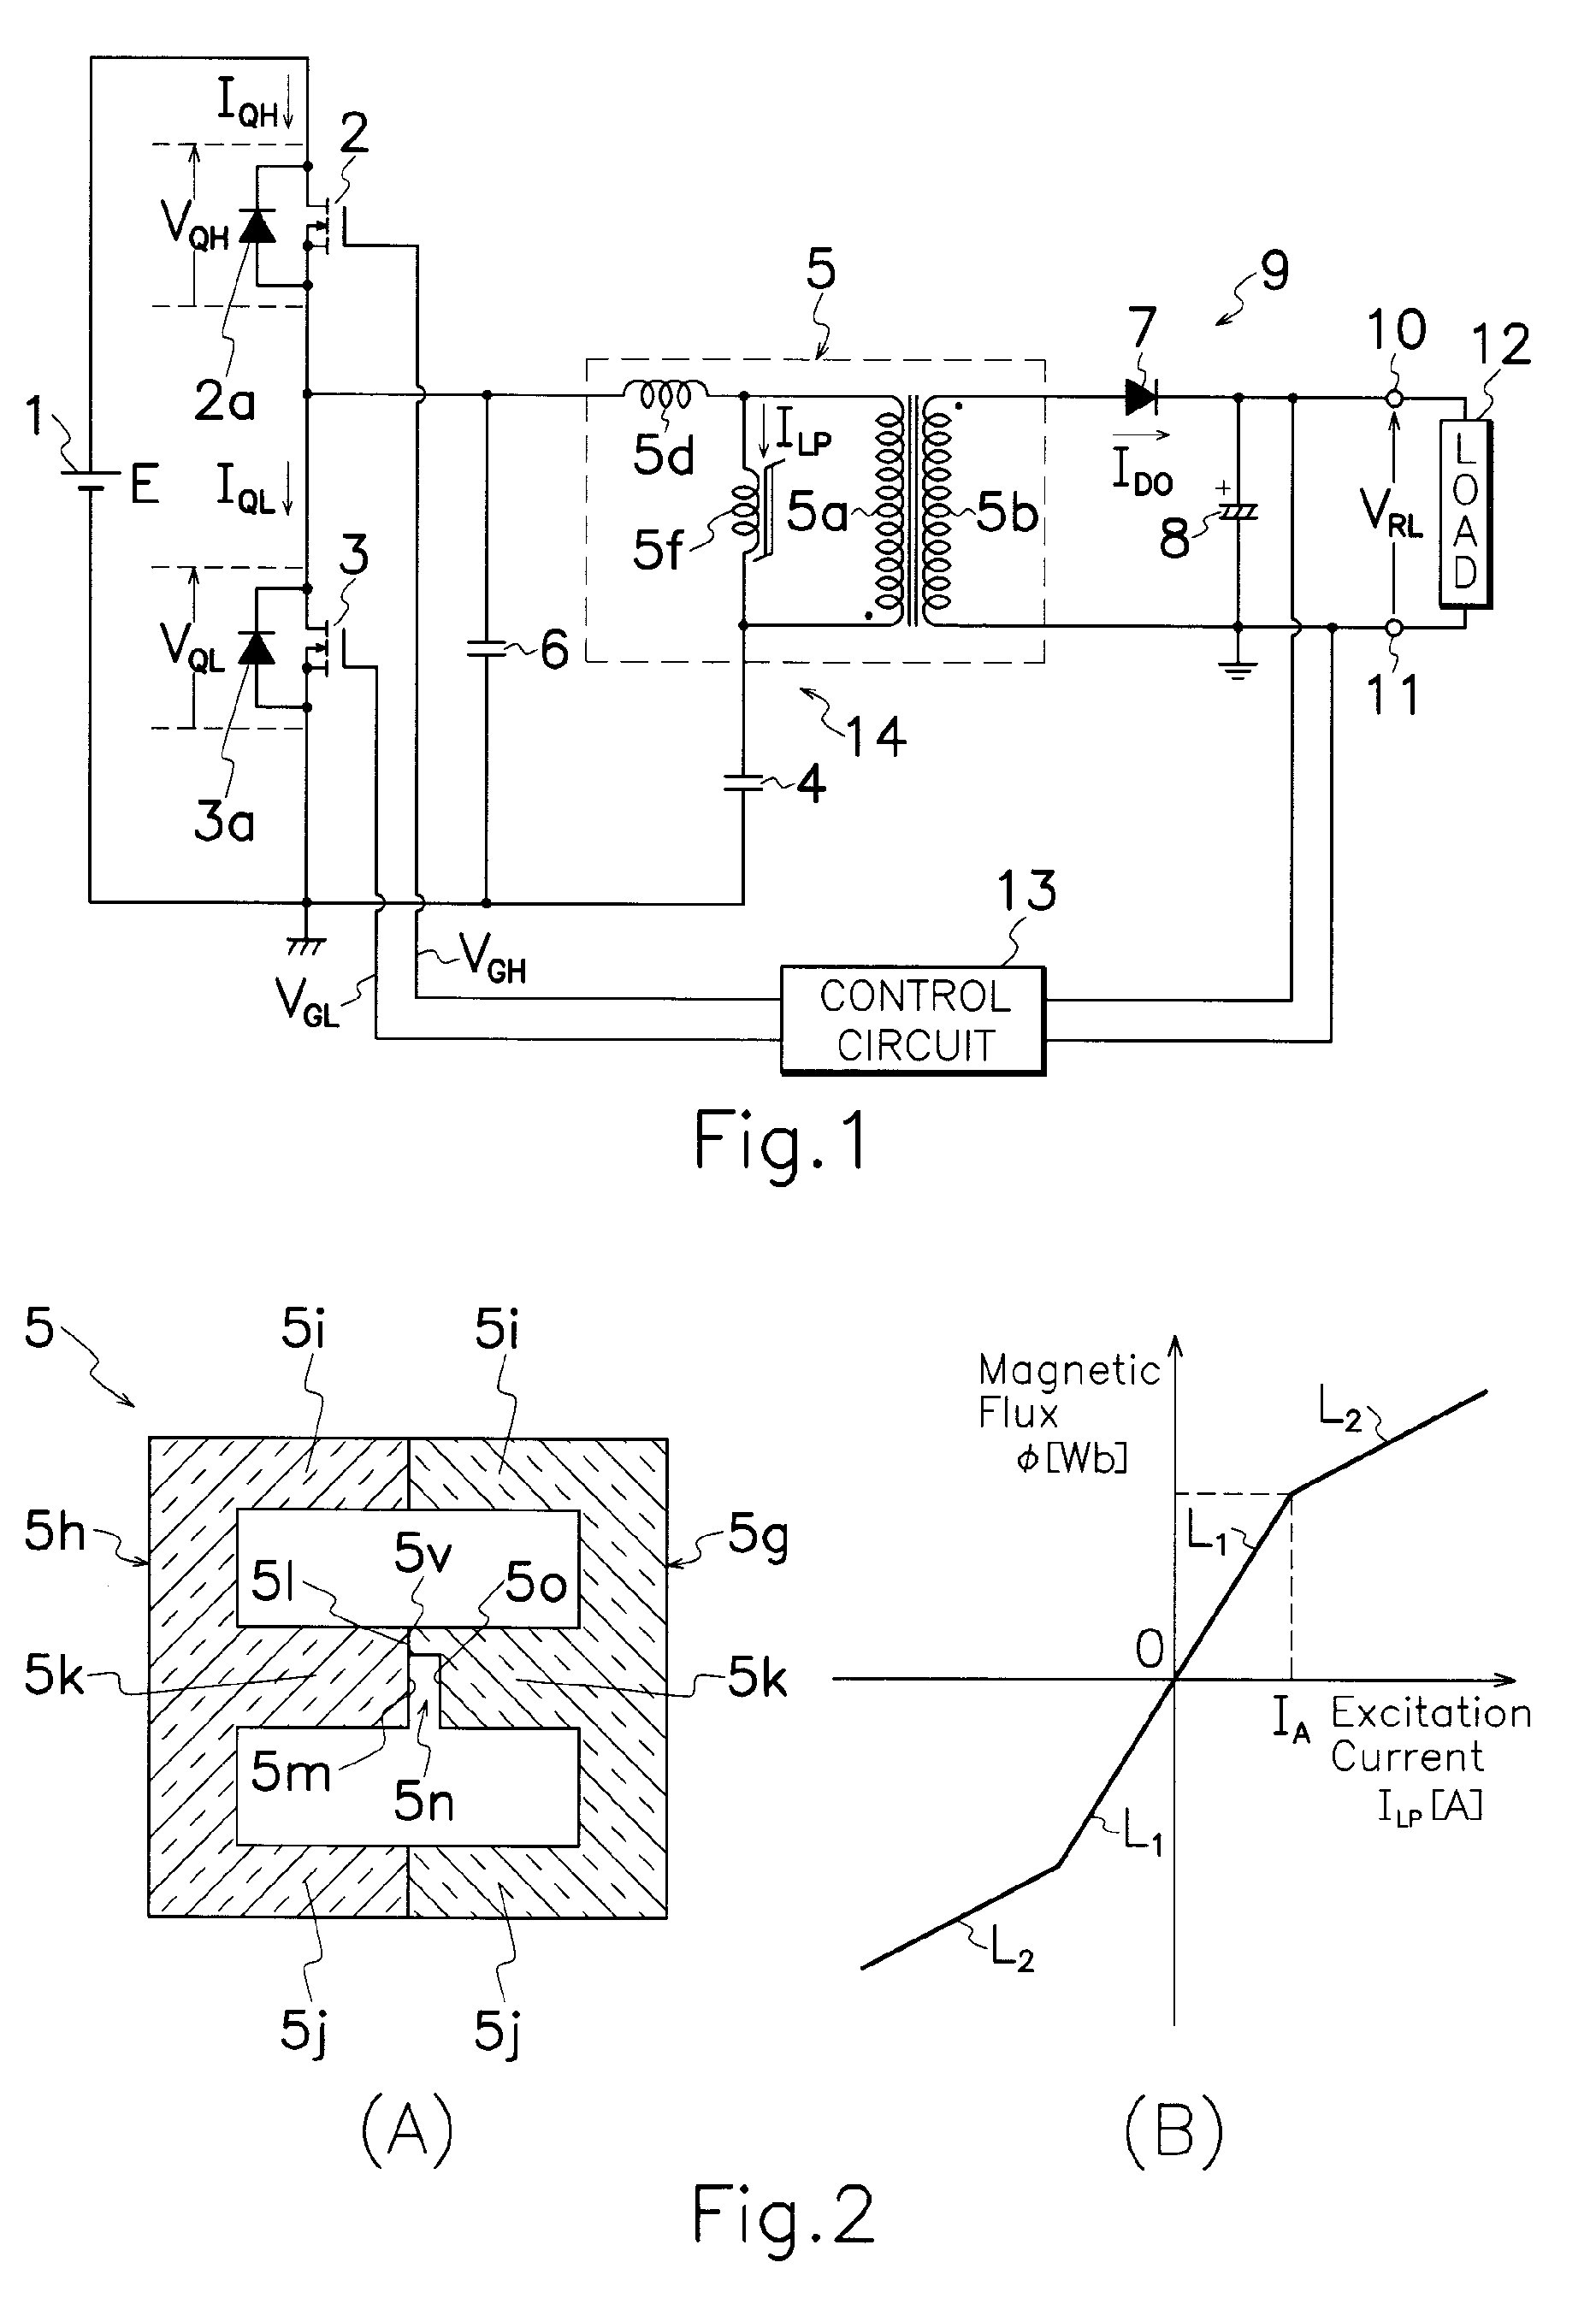 Resonant switching power source having first and second switching elements connected in series to a DC power source